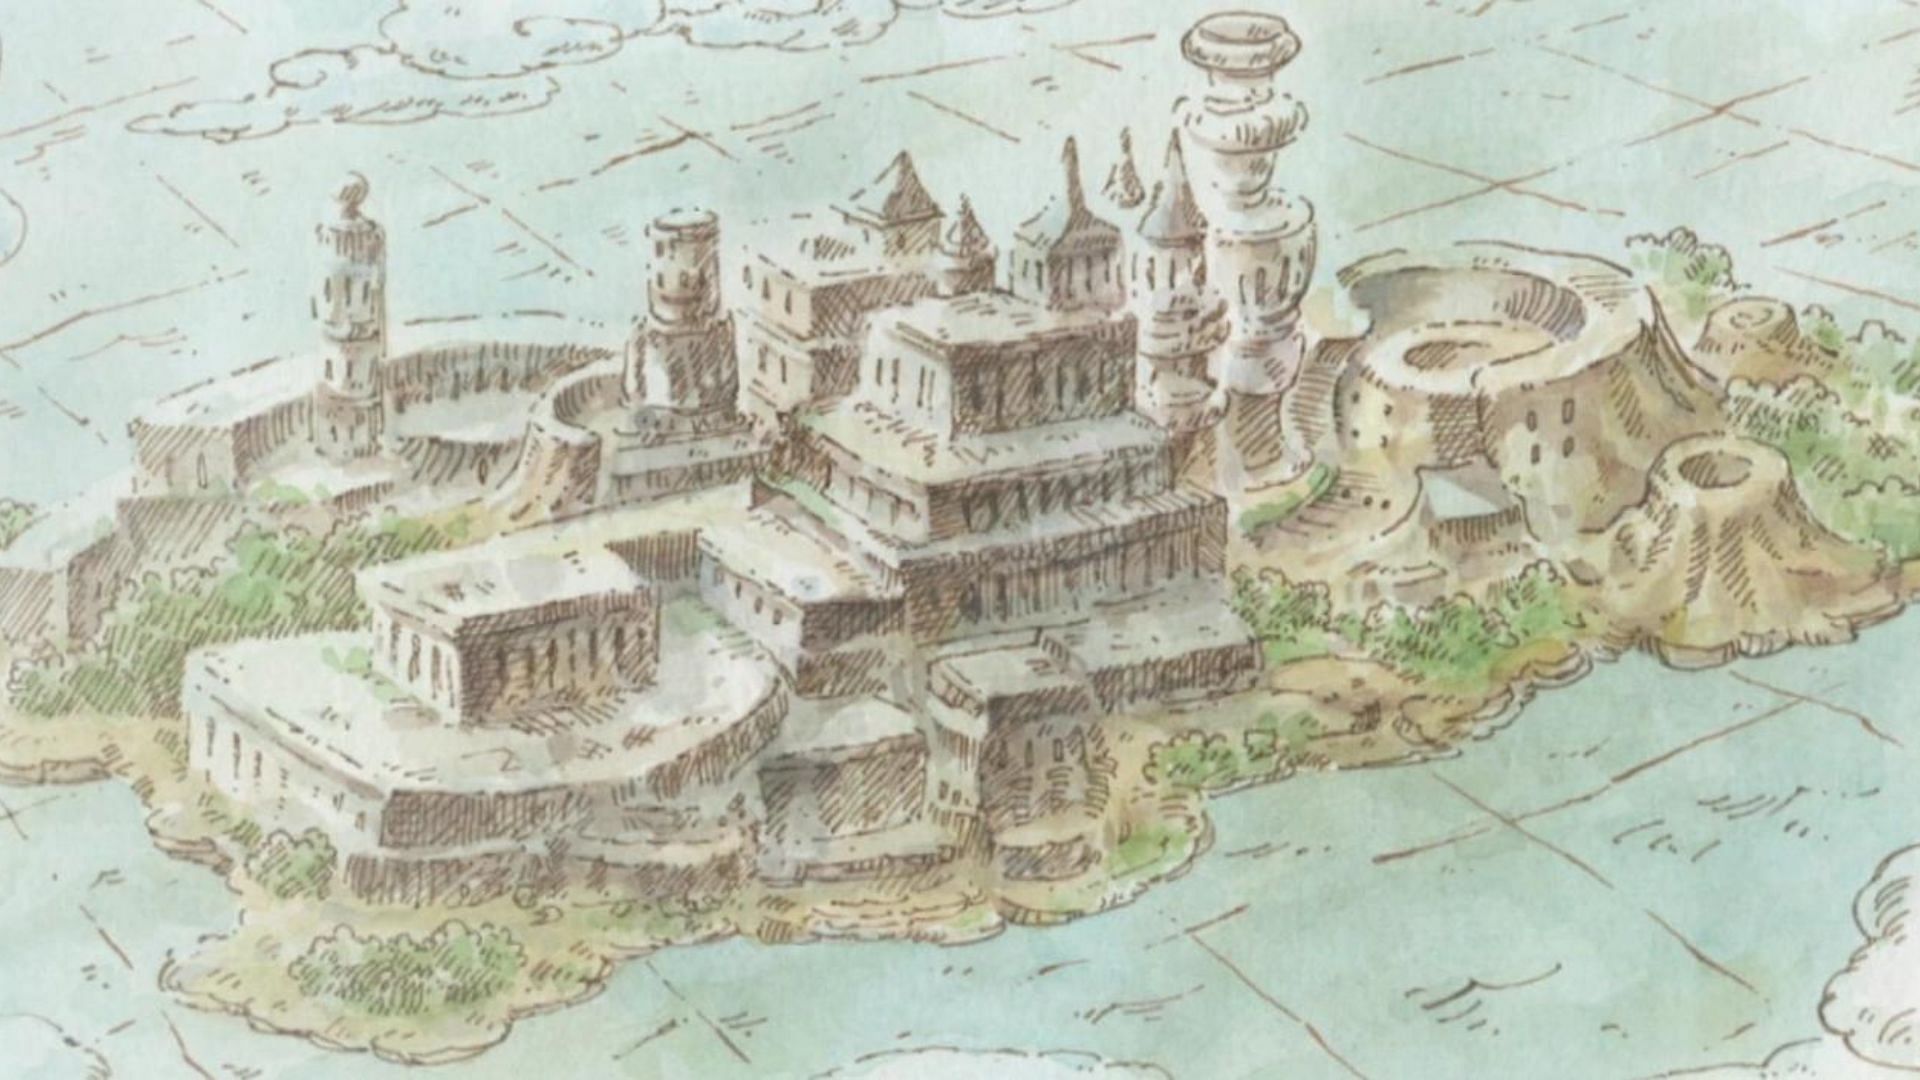 One Piece fans may already know the Ancient Kingdom